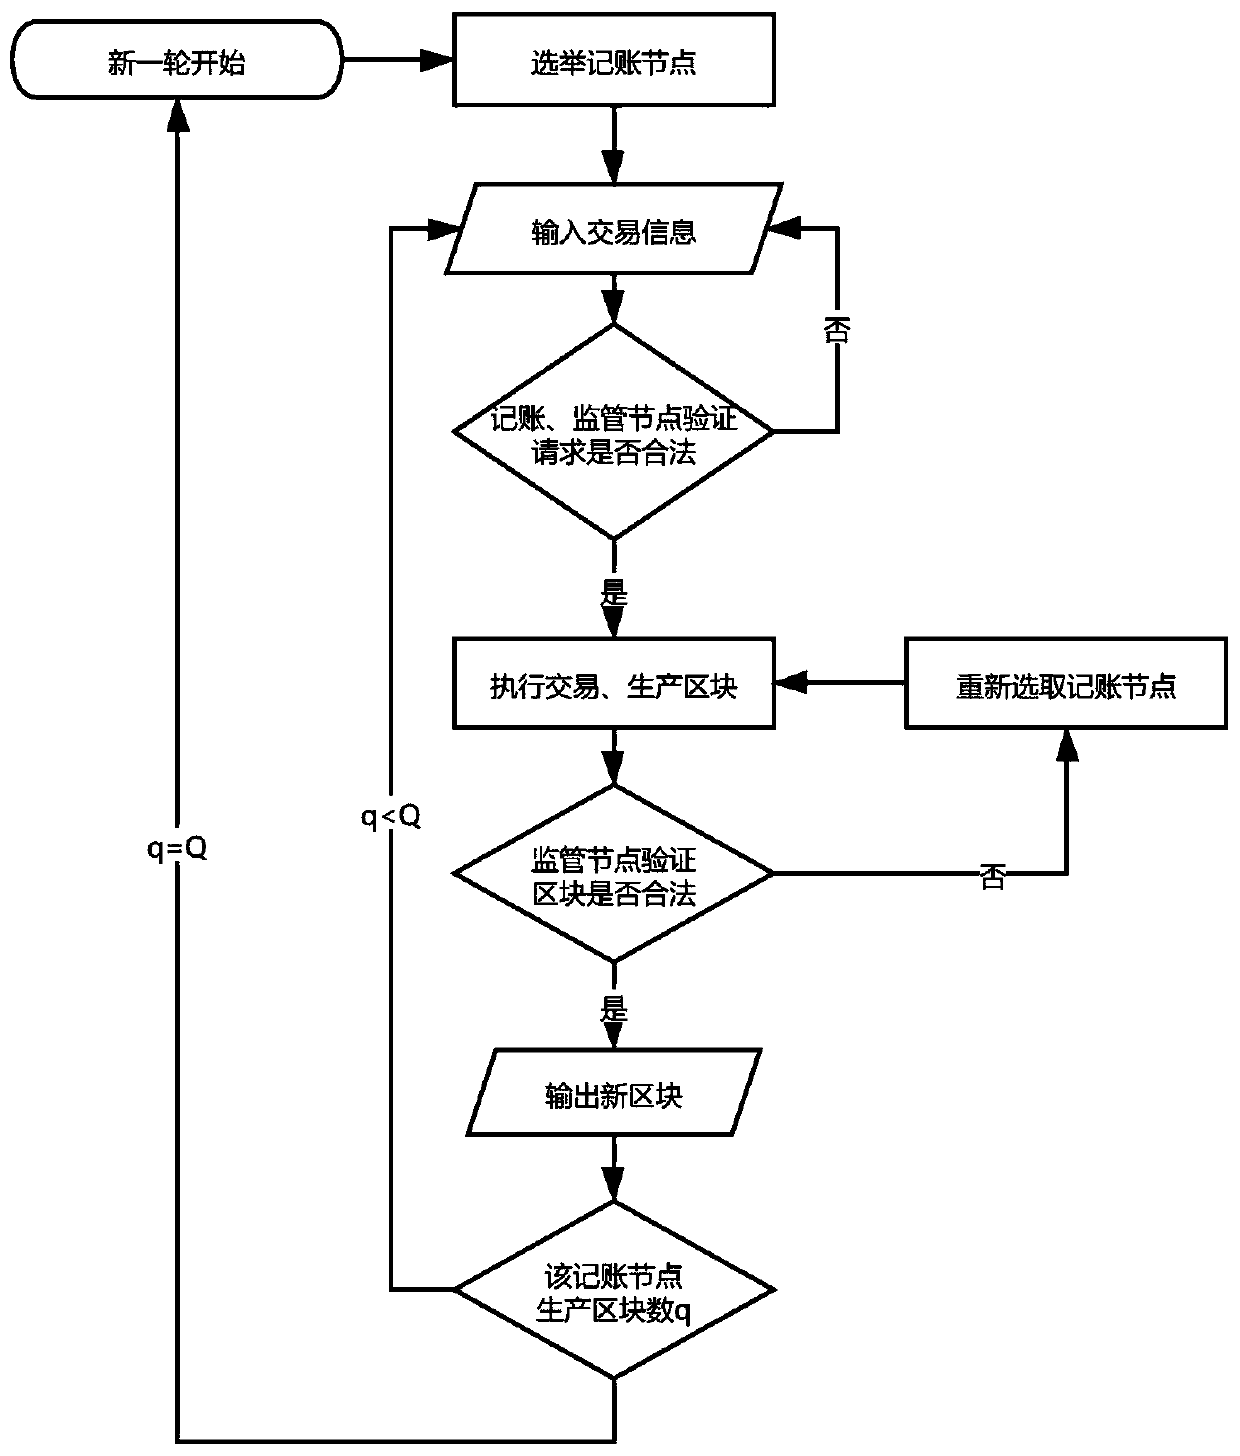 Alliance chain-based intelligent agricultural machinery scheduling system and scheduling method thereof